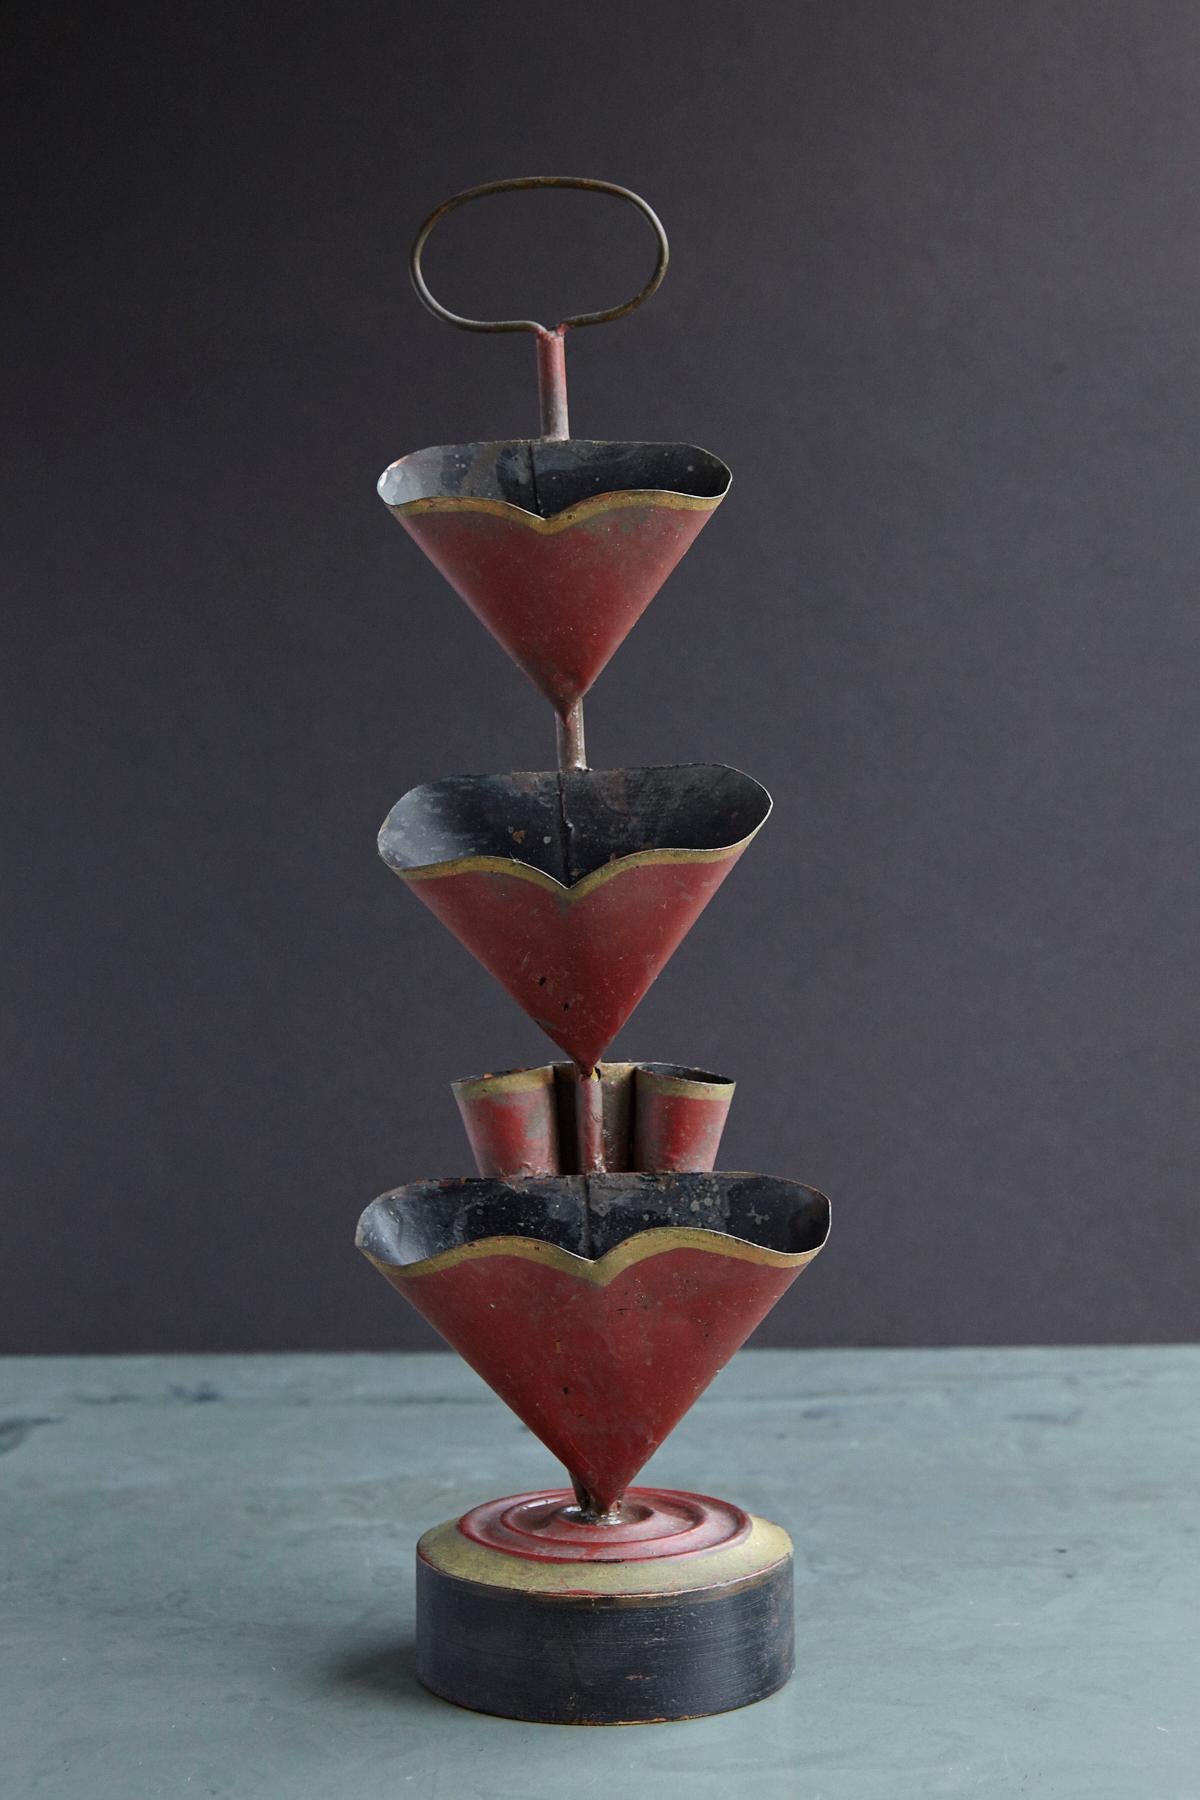 Late 19th century French three-tier tole candy or cookie display stand, painted in red with a gold trim mounted on a black and gold paint wooden base with a top handle for serving. The stand has it's original paint and a nice patina.
 